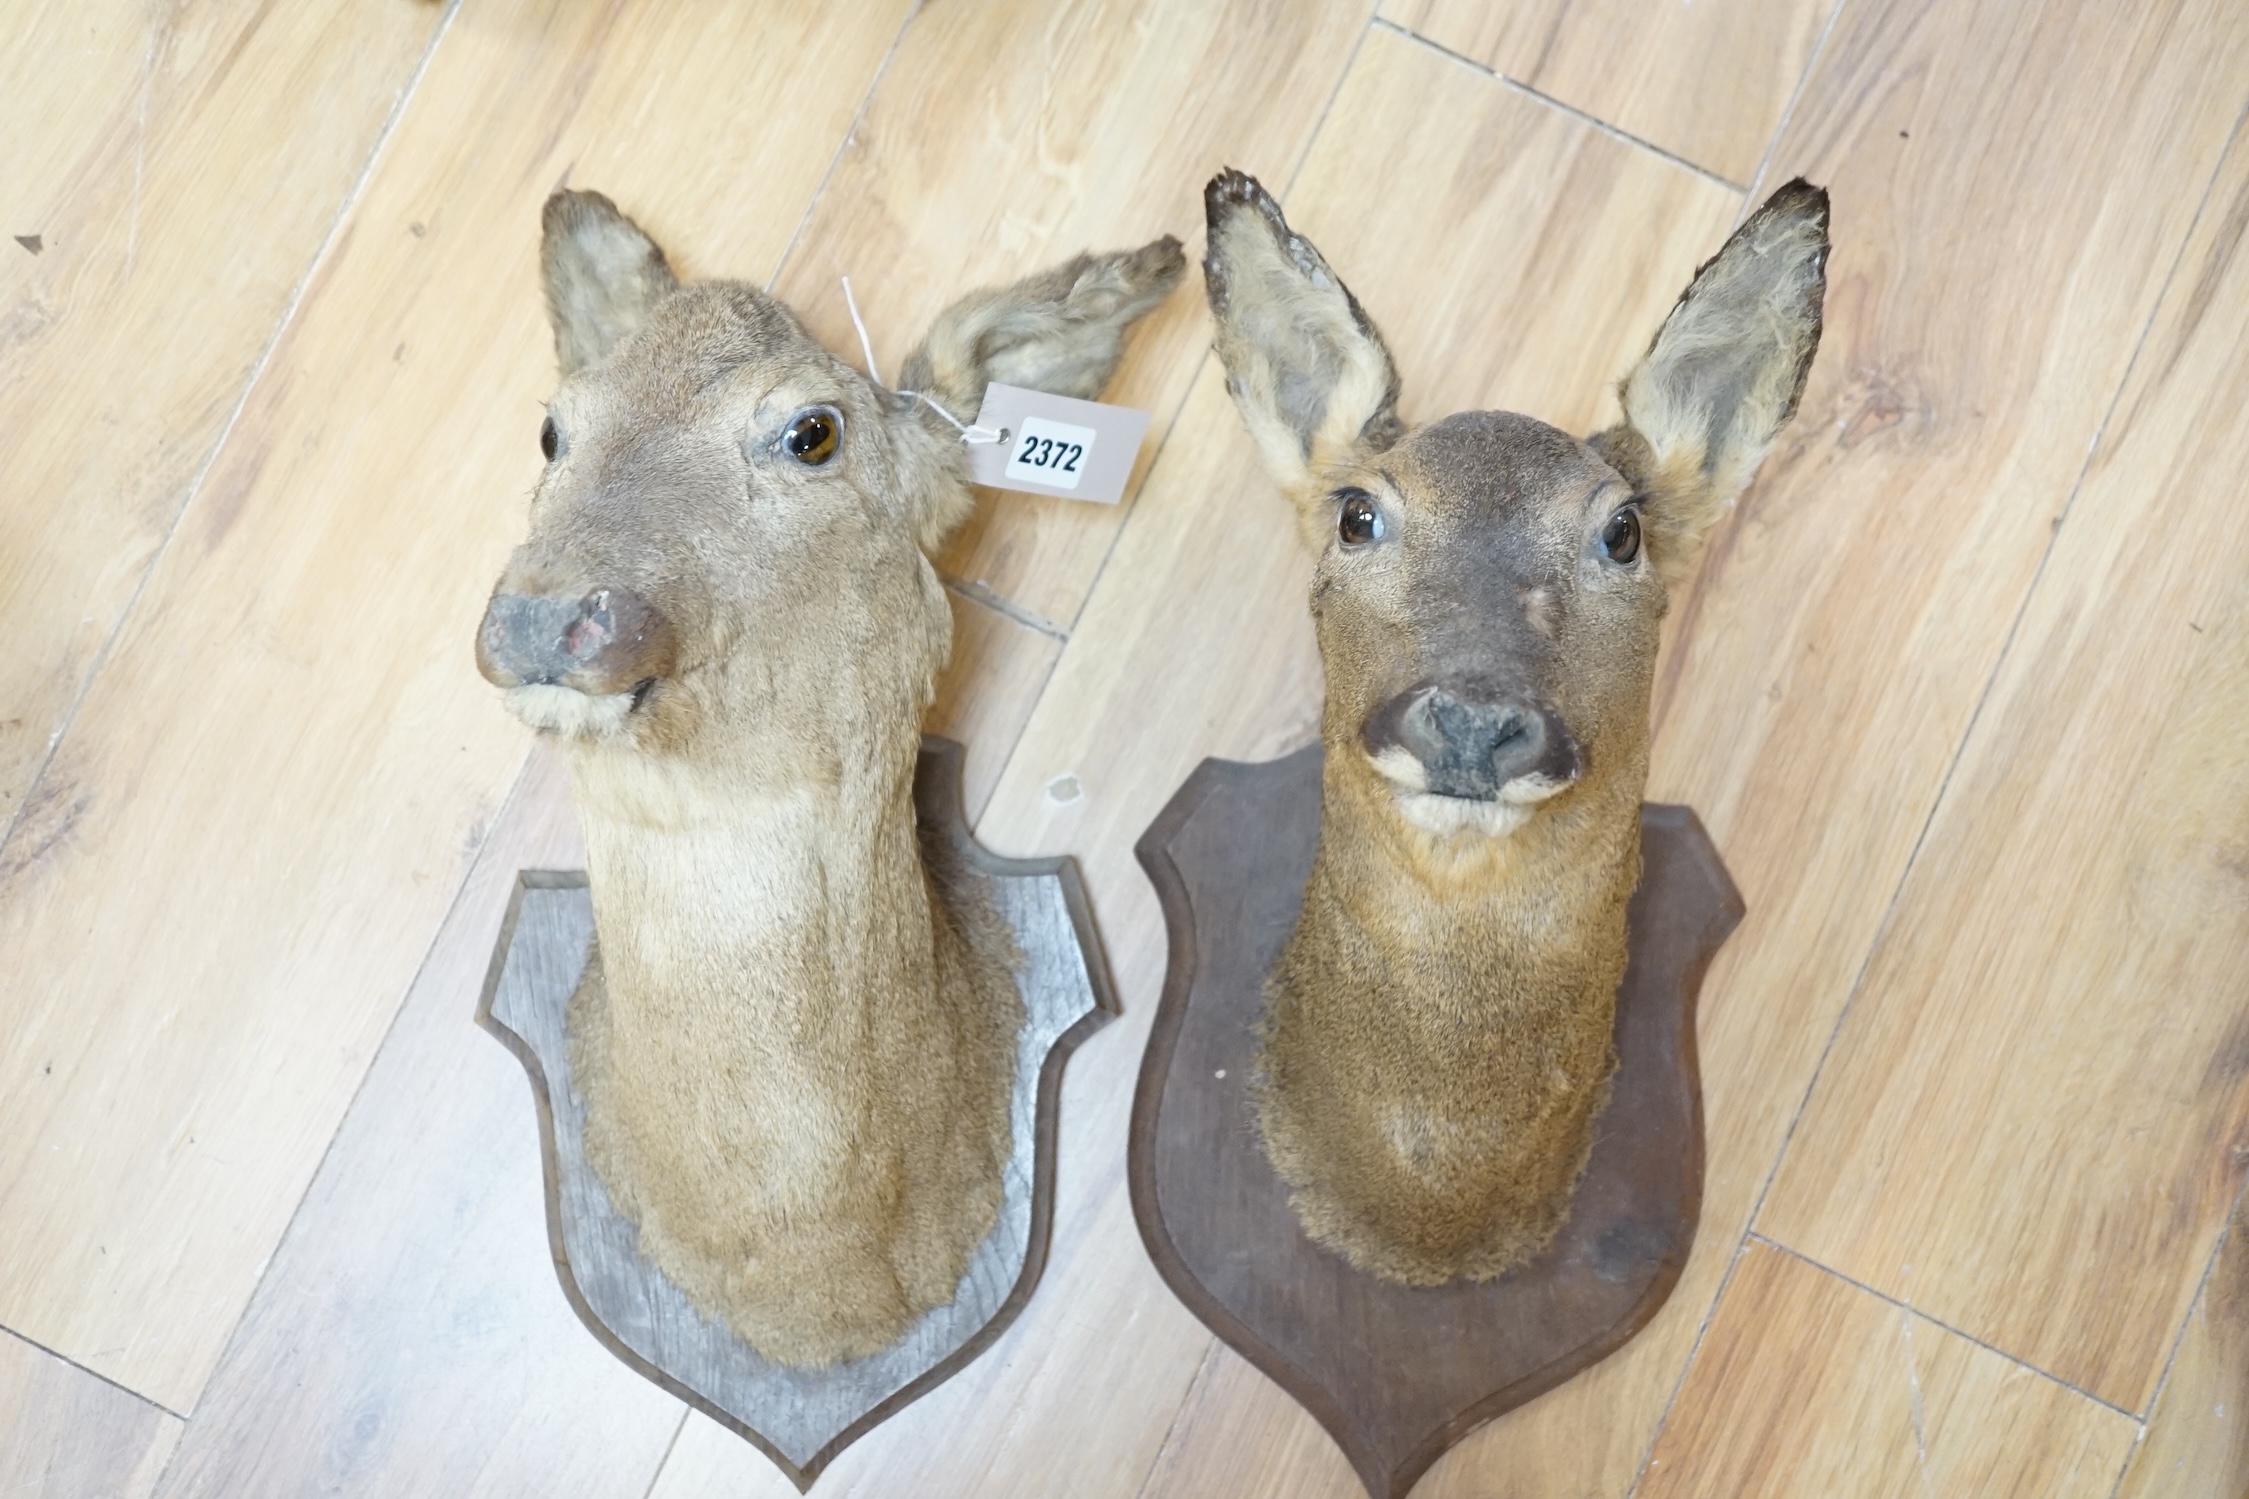 Two taxidermy mounted deer's heads, approximately 40cm high. Condition - fair